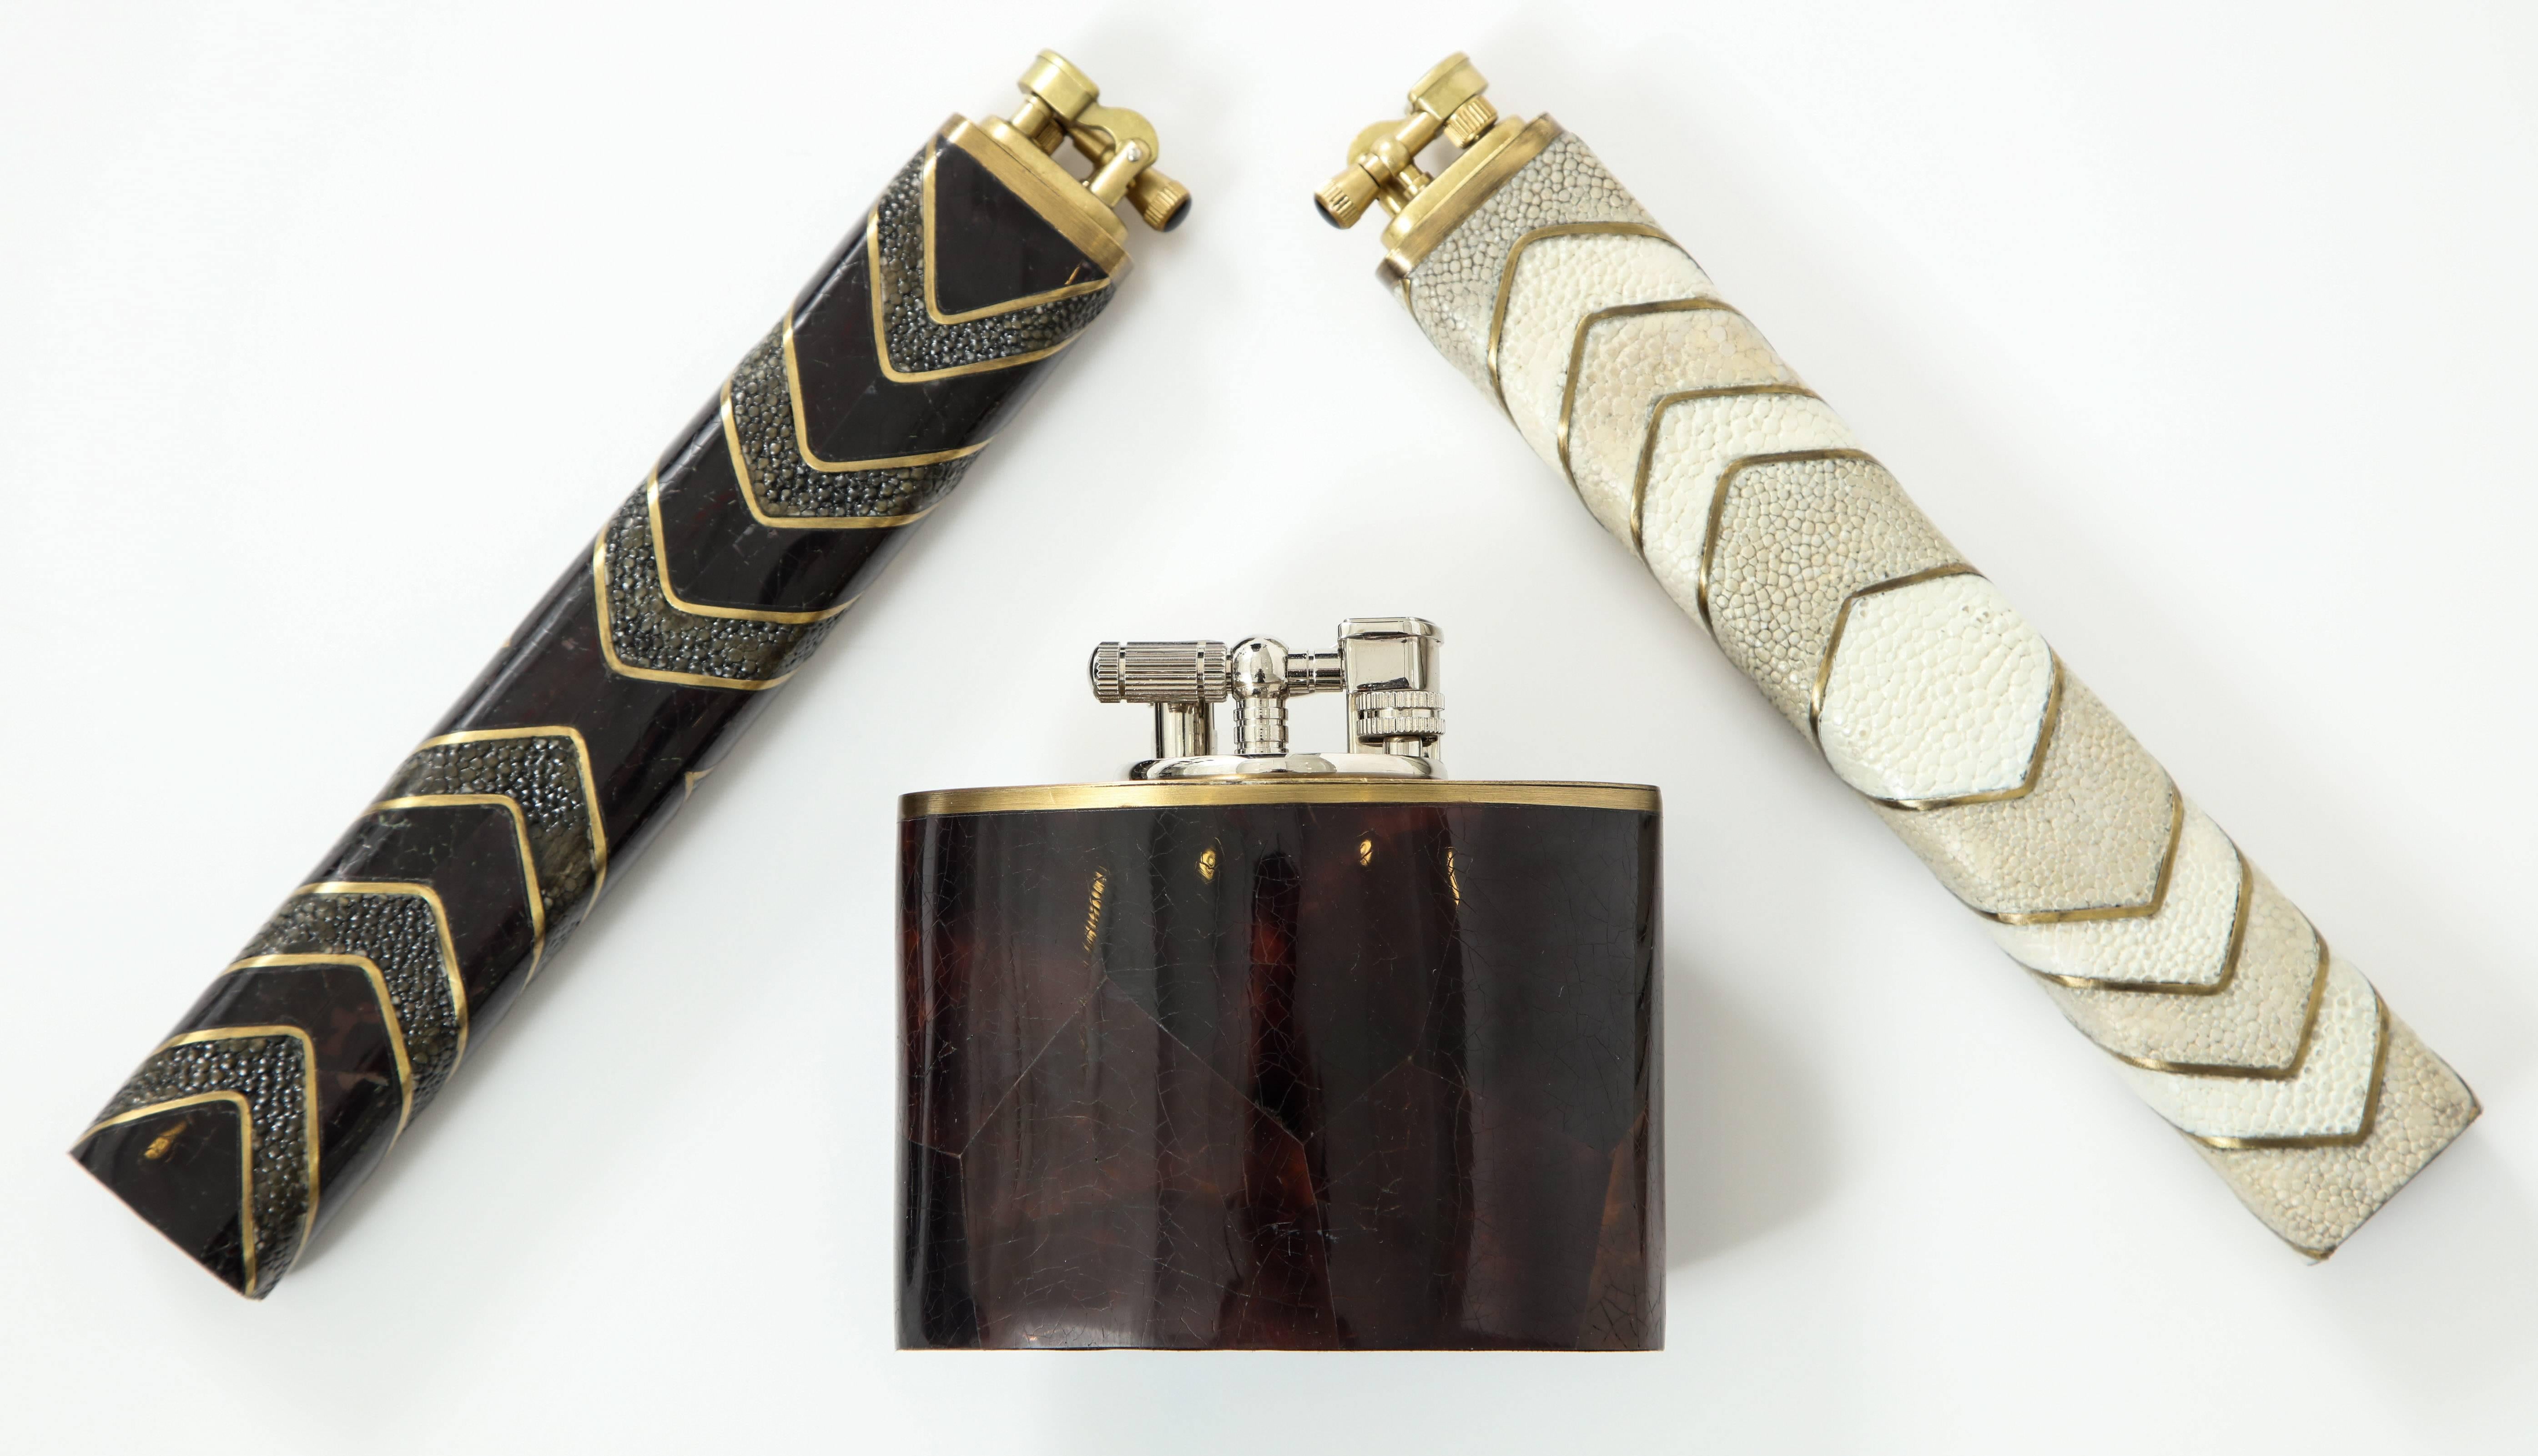 Shagreen lighters with decorative details of black sea shell, both priced at $495 each. Oval lighter made of dark brown sea shell, priced at $495.